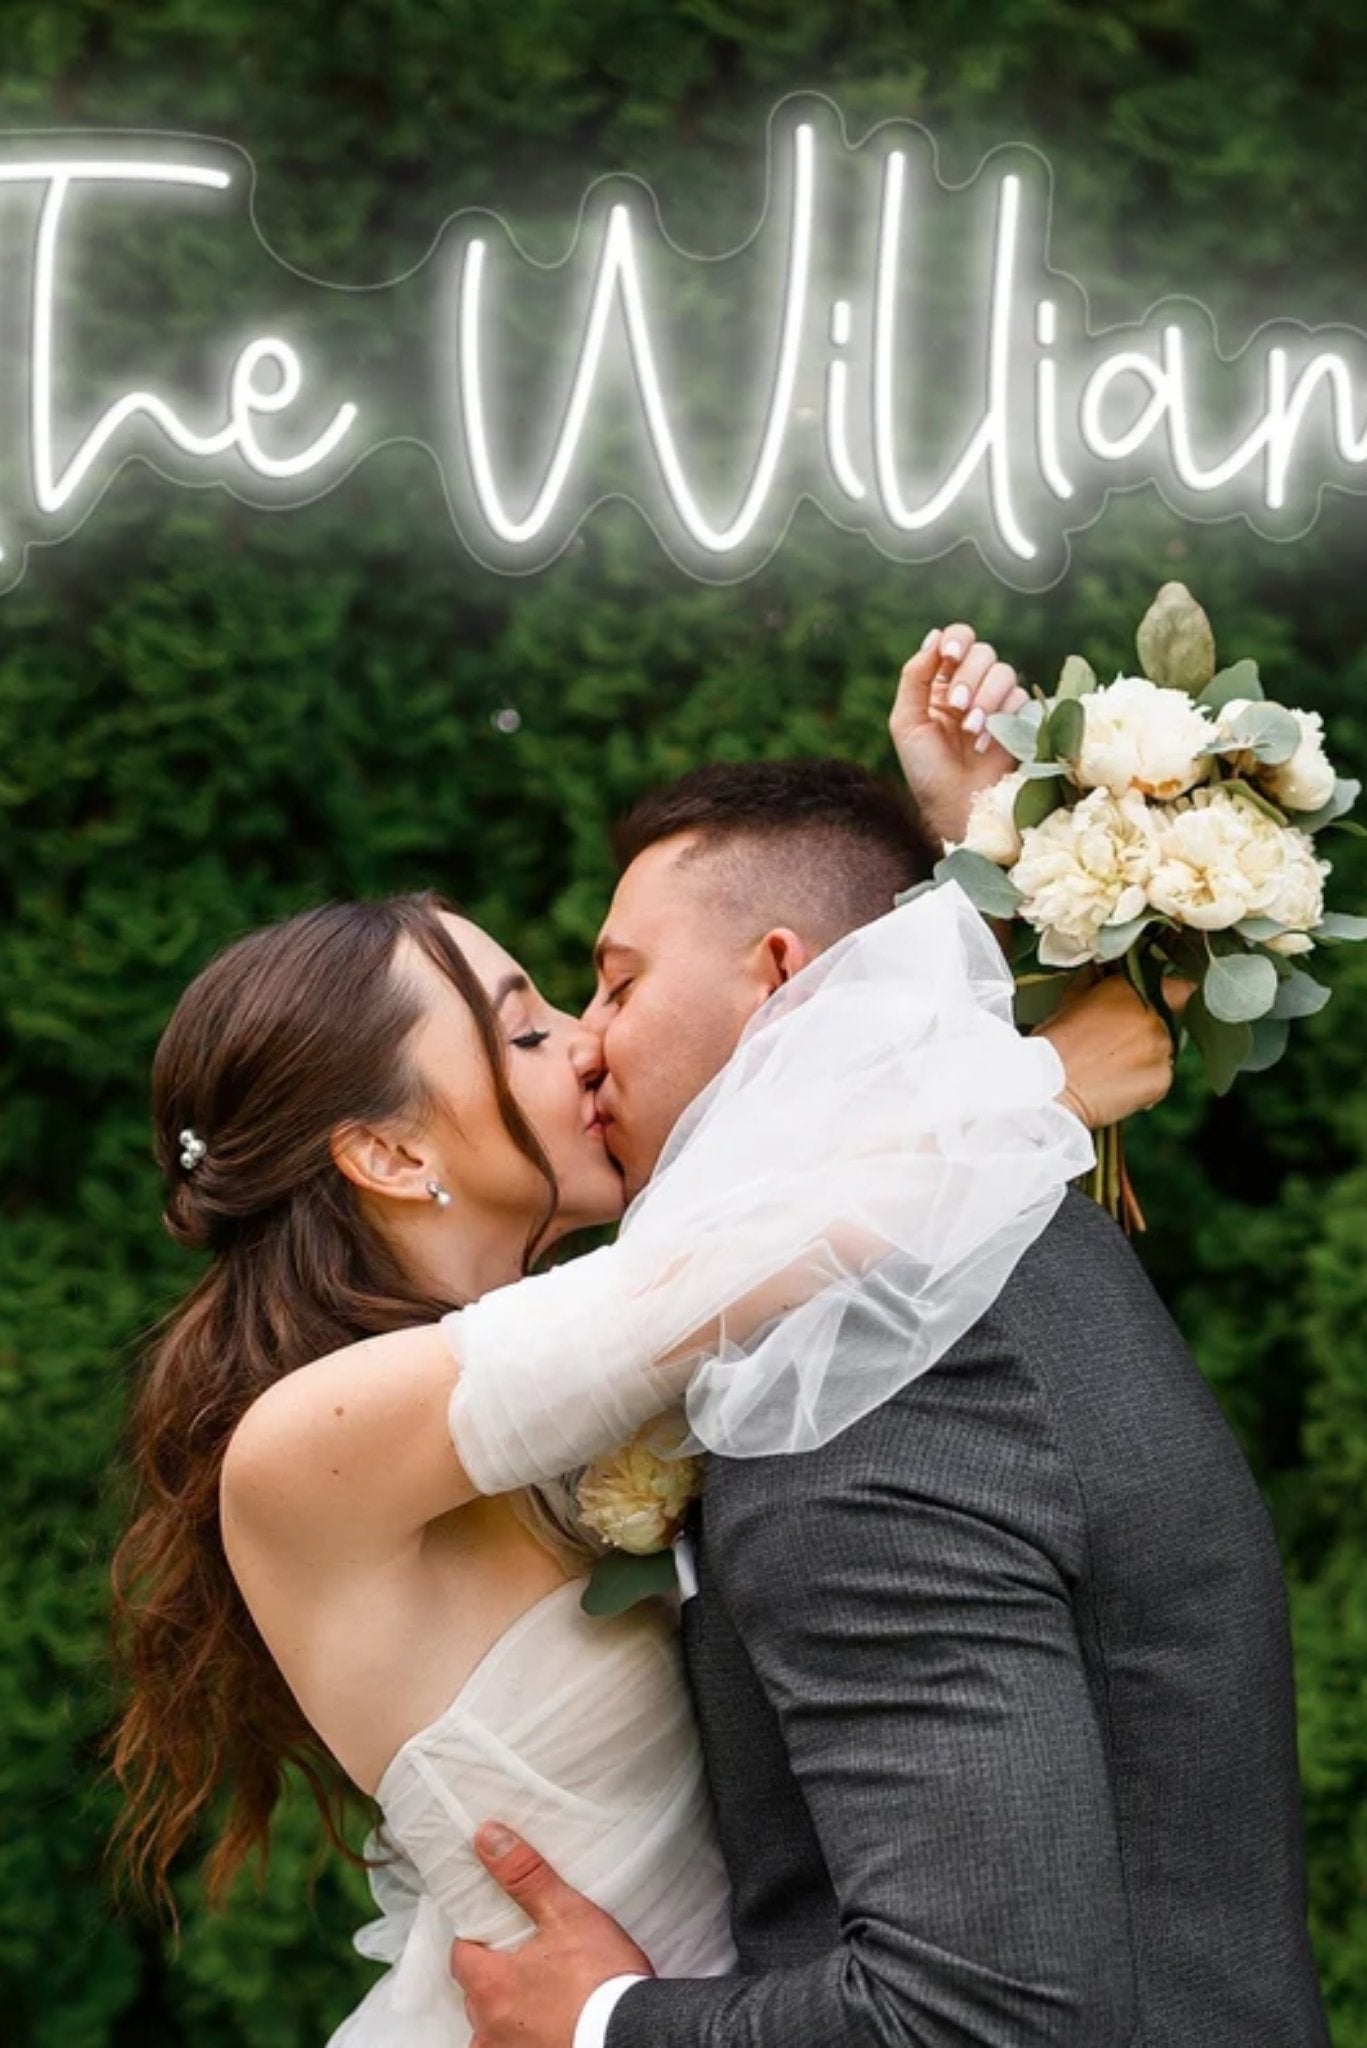 Neon Wedding Signs for Every Budget - Pretty Collected